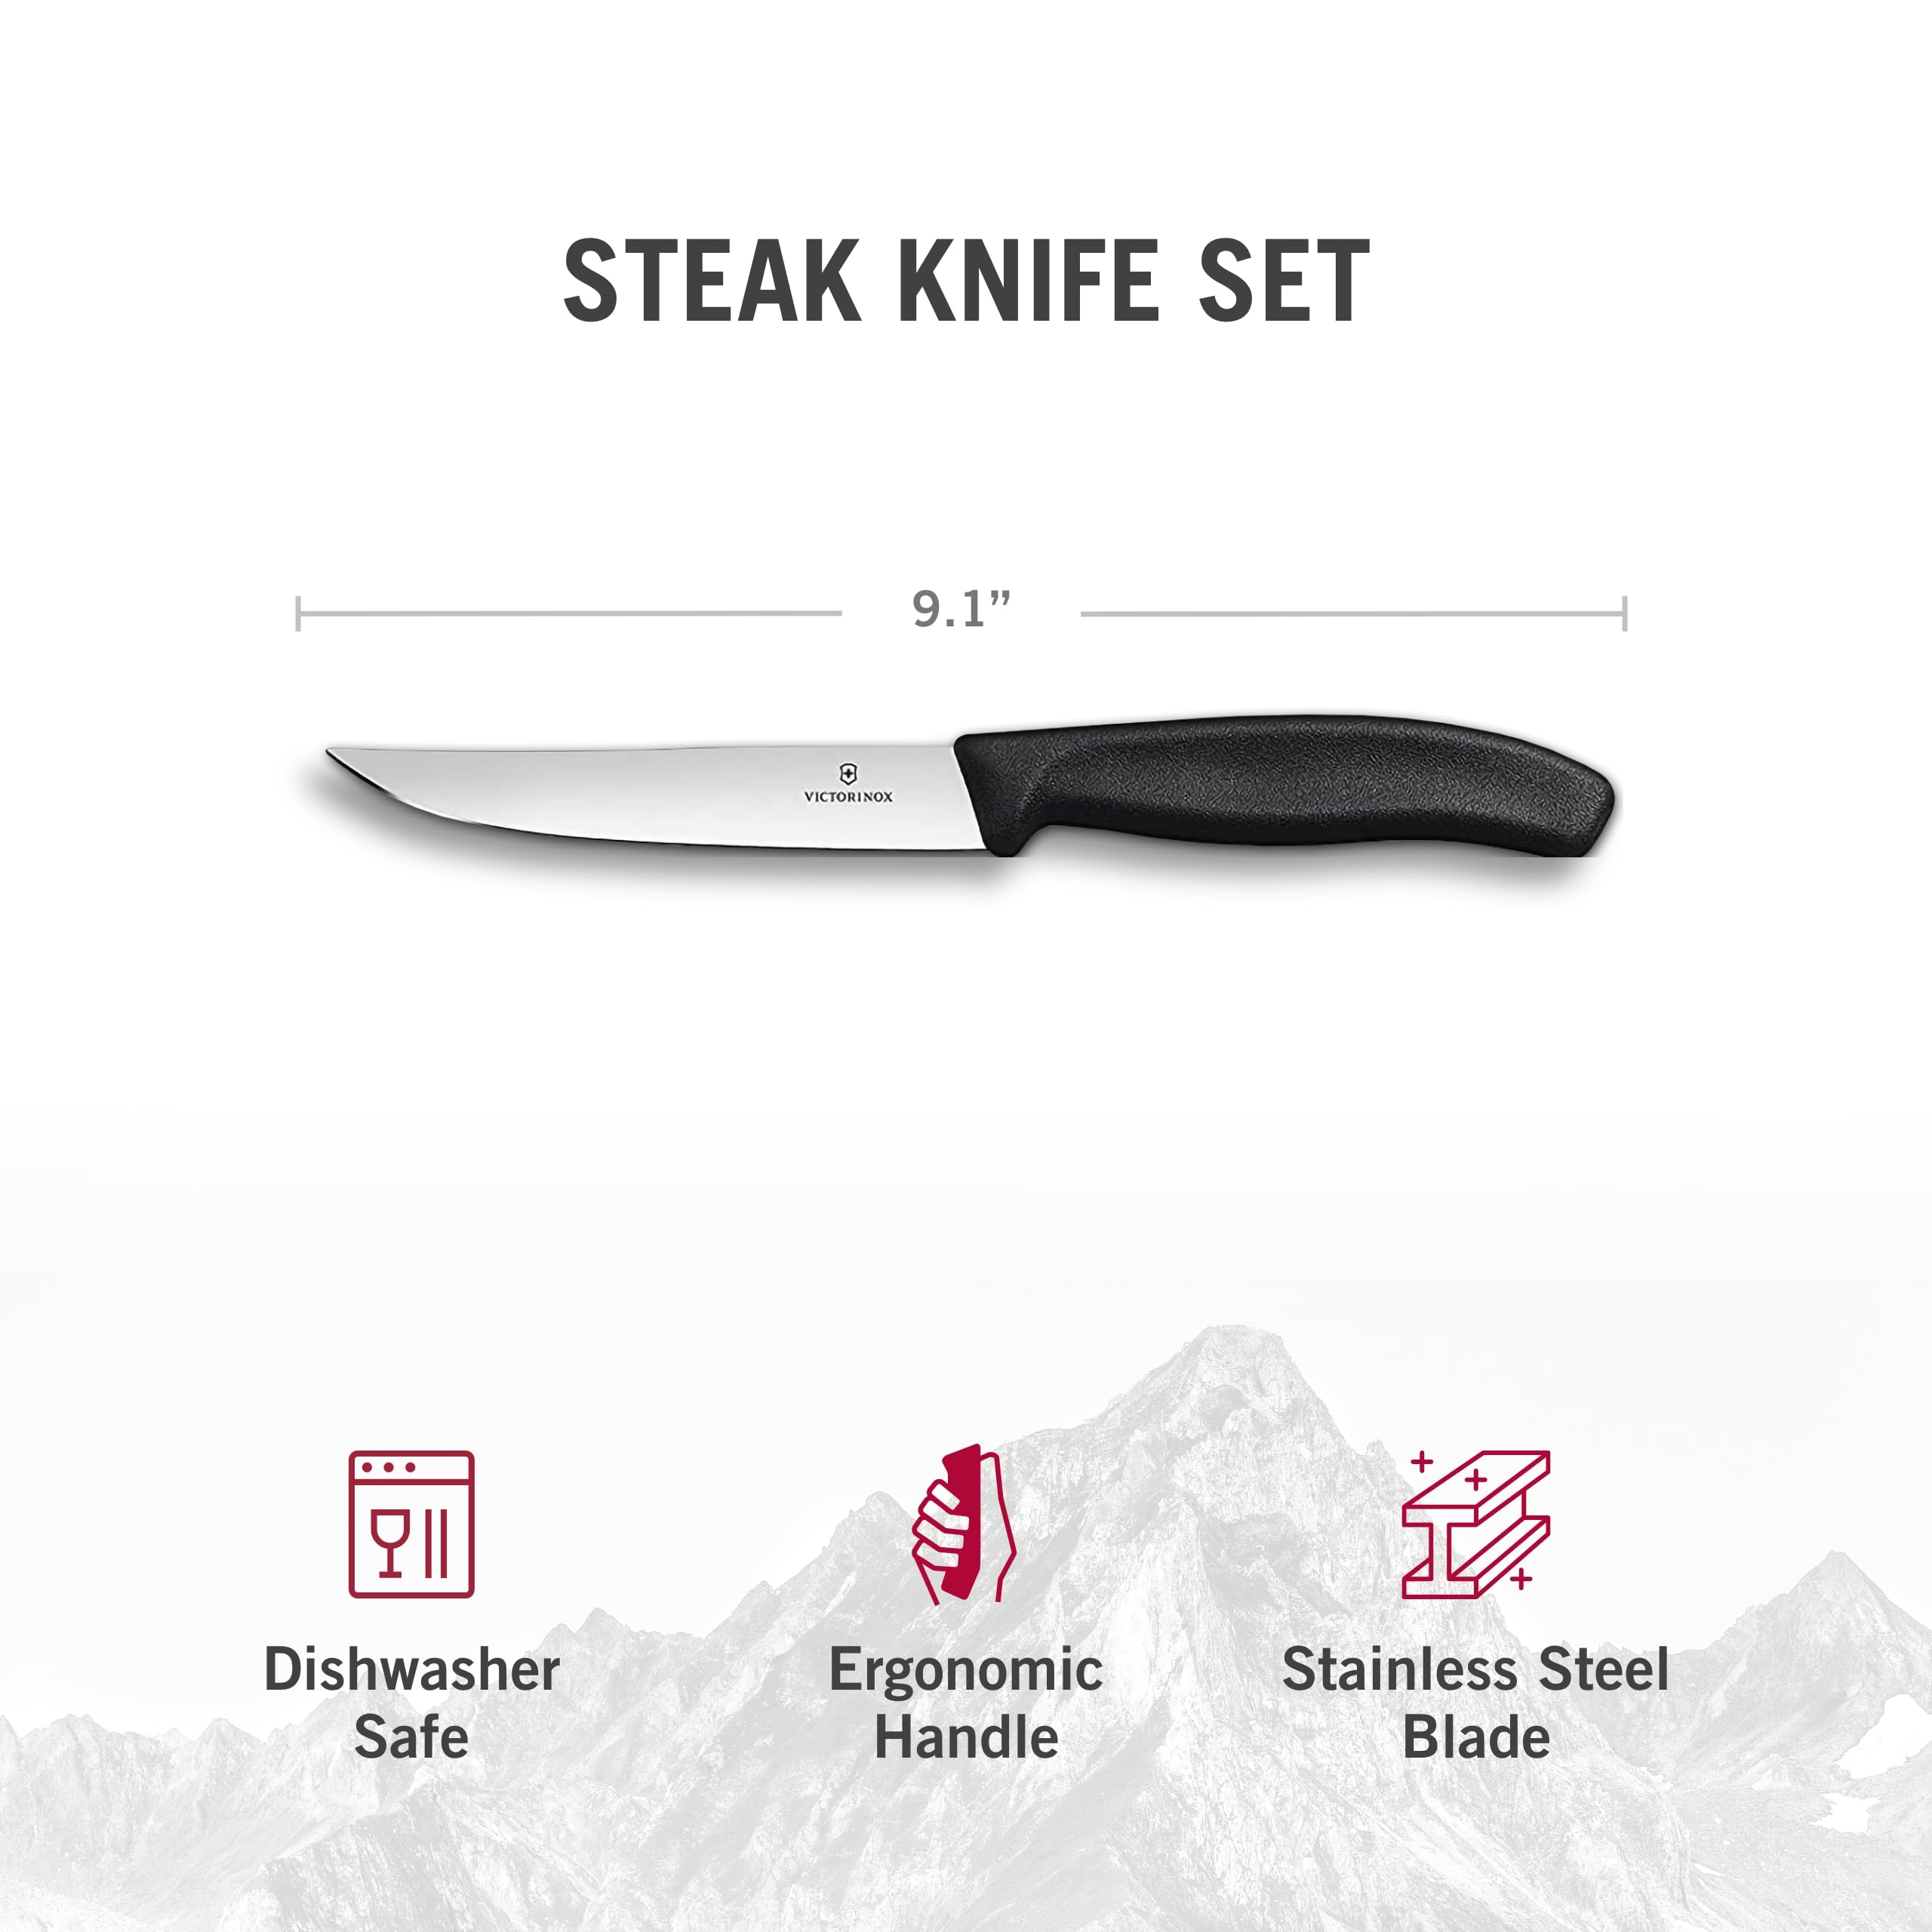 Victorinox Swiss Classic Steak Knives - Cooking Knives for Kitchen Utensils - Ergonomic, Stainless Steel Meat Knives - Black Handles, Straight Edge, 6-Piece Set